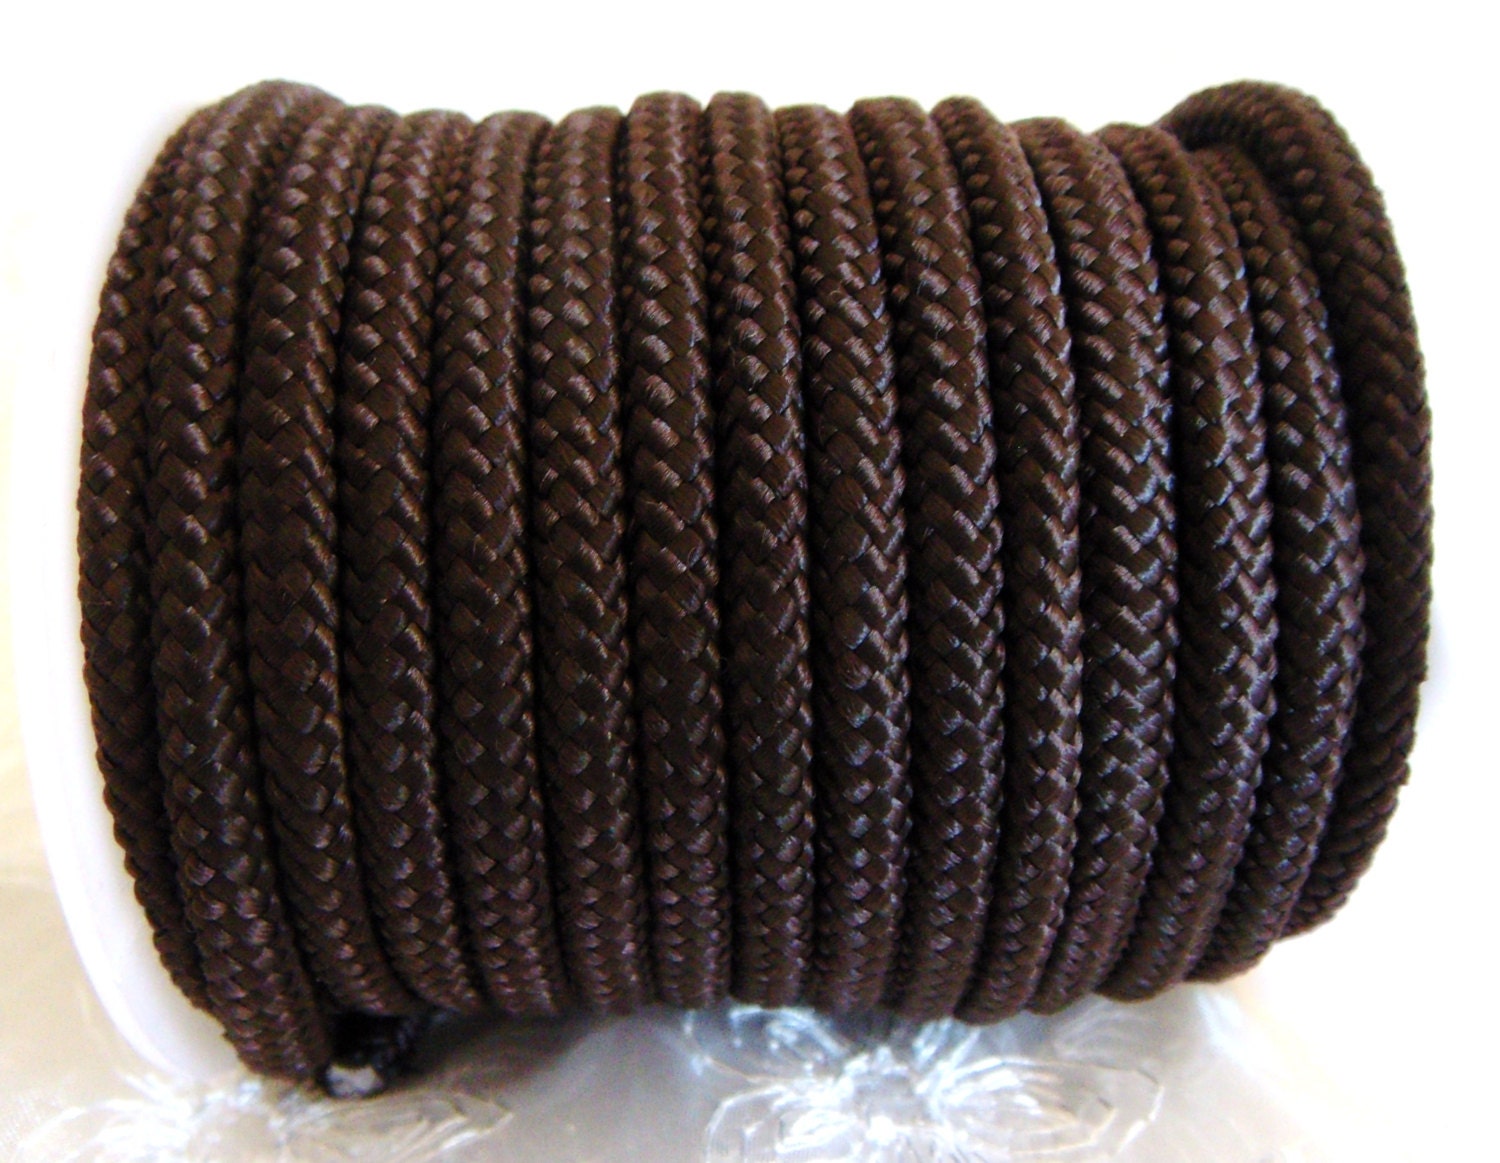 Buy Braided Trim Rope Cord, Semisoft Climbing Cord, Dark Brown Striped  String Round Cord 5mm Approx. 2 Yards/ 1.85m 1 Piece Online in India 